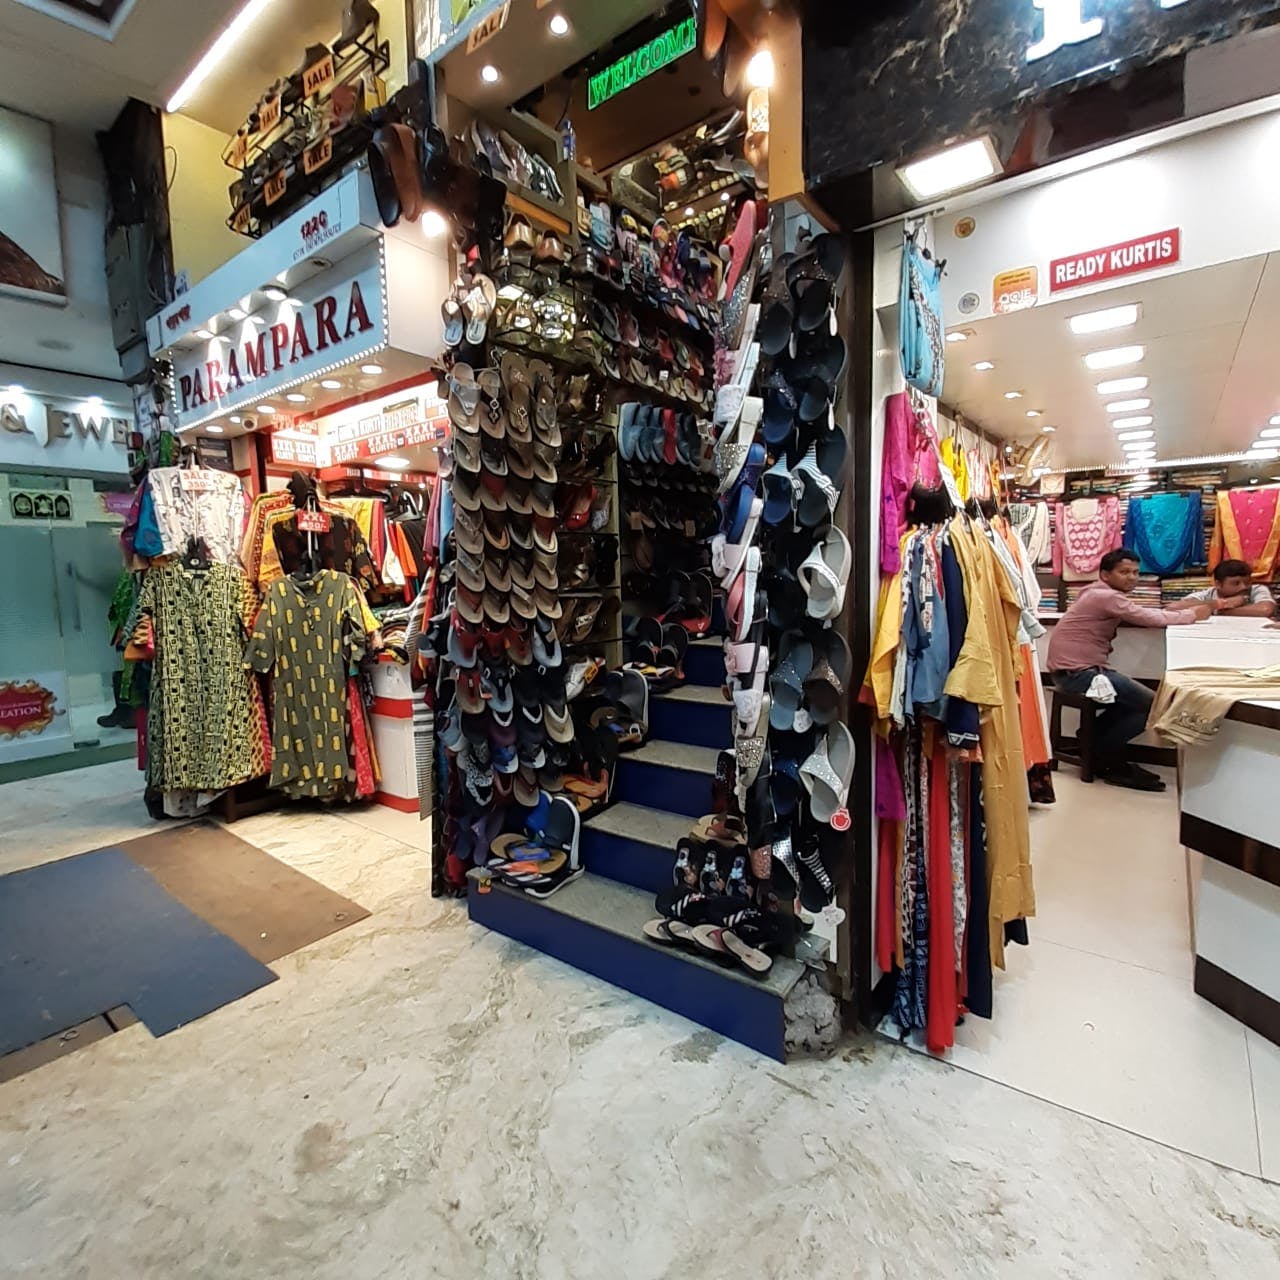 Outlet store,Retail,Boutique,Building,Shopping mall,Footwear,Marketplace,Bazaar,Shopping,Shoe